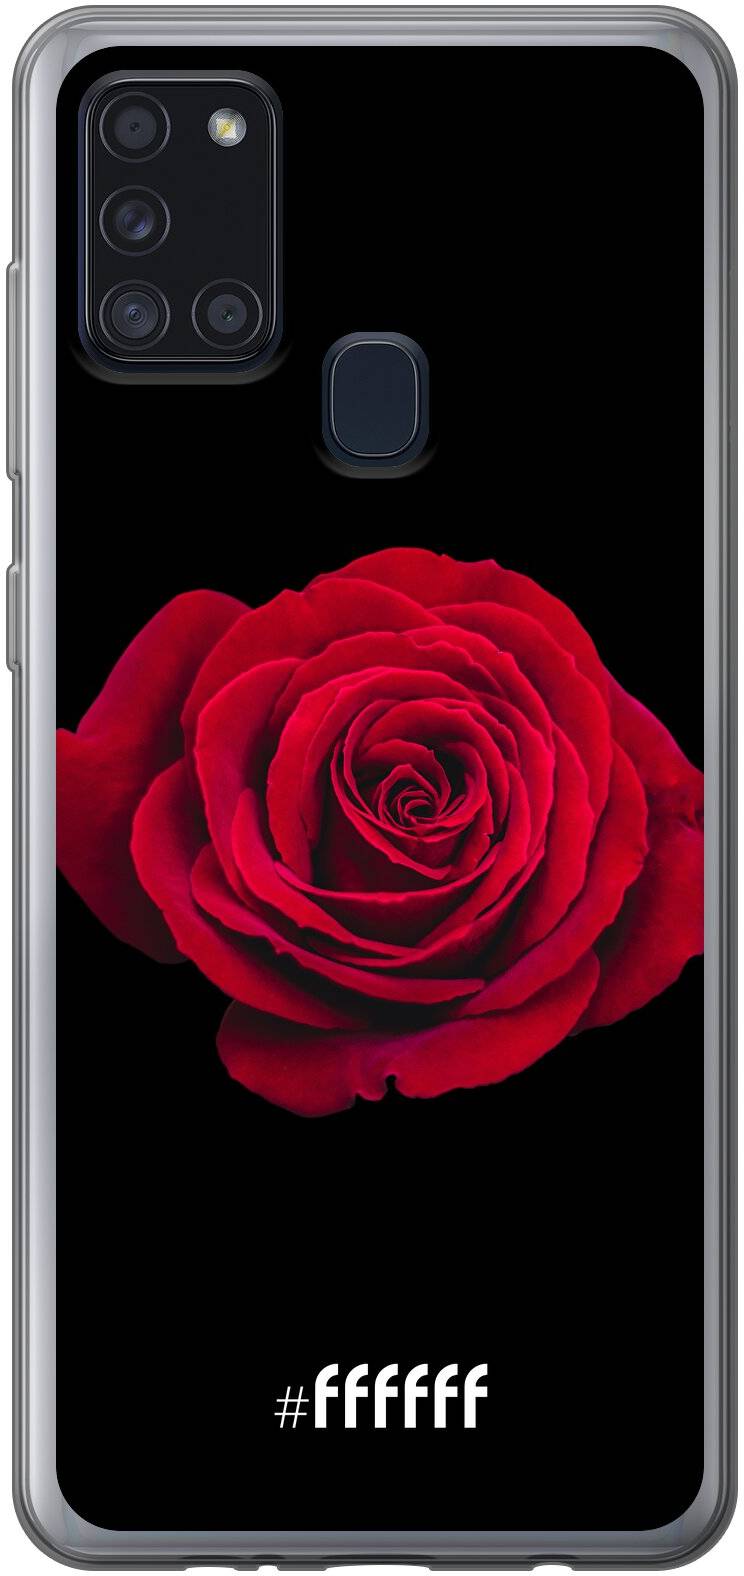 Radiant Rose Galaxy A21s